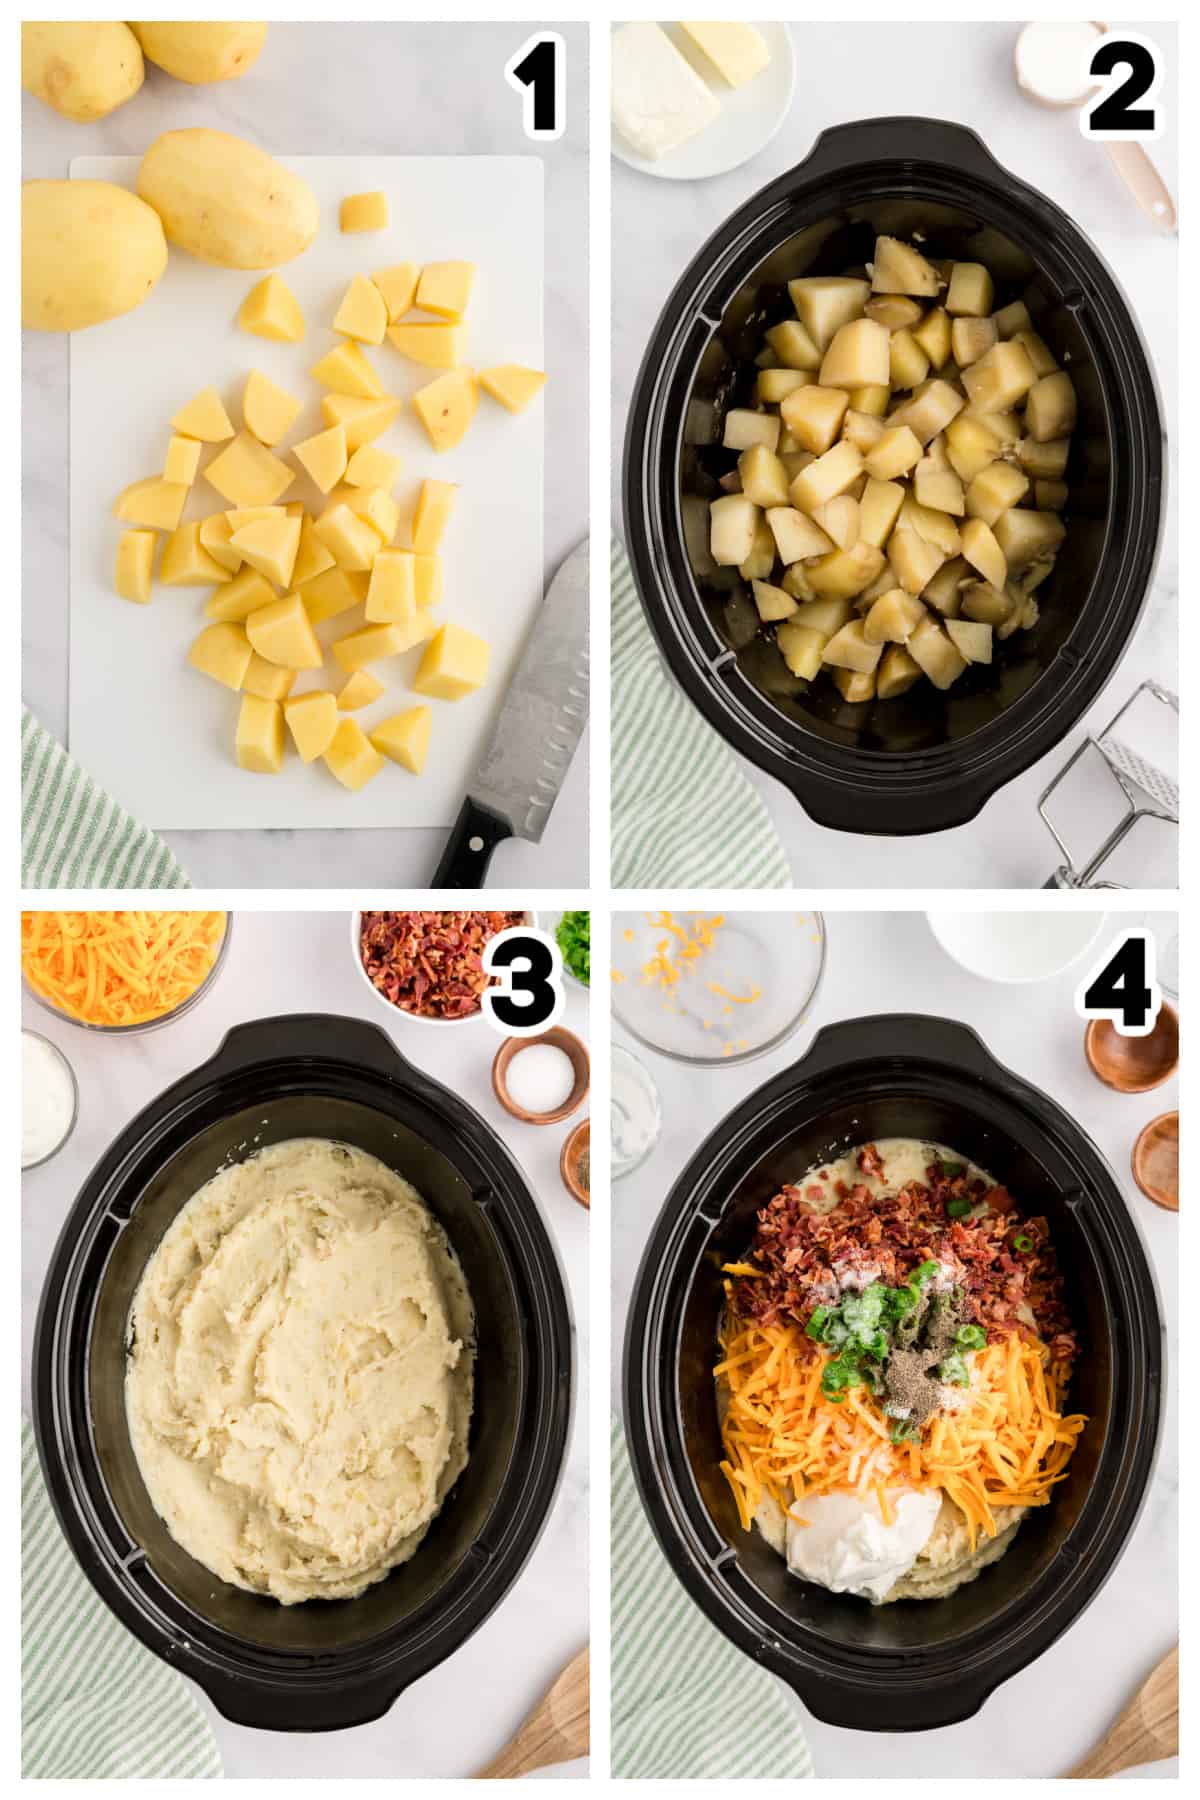 Collage showing how to make loaded mashed potatoes in the crockpot.